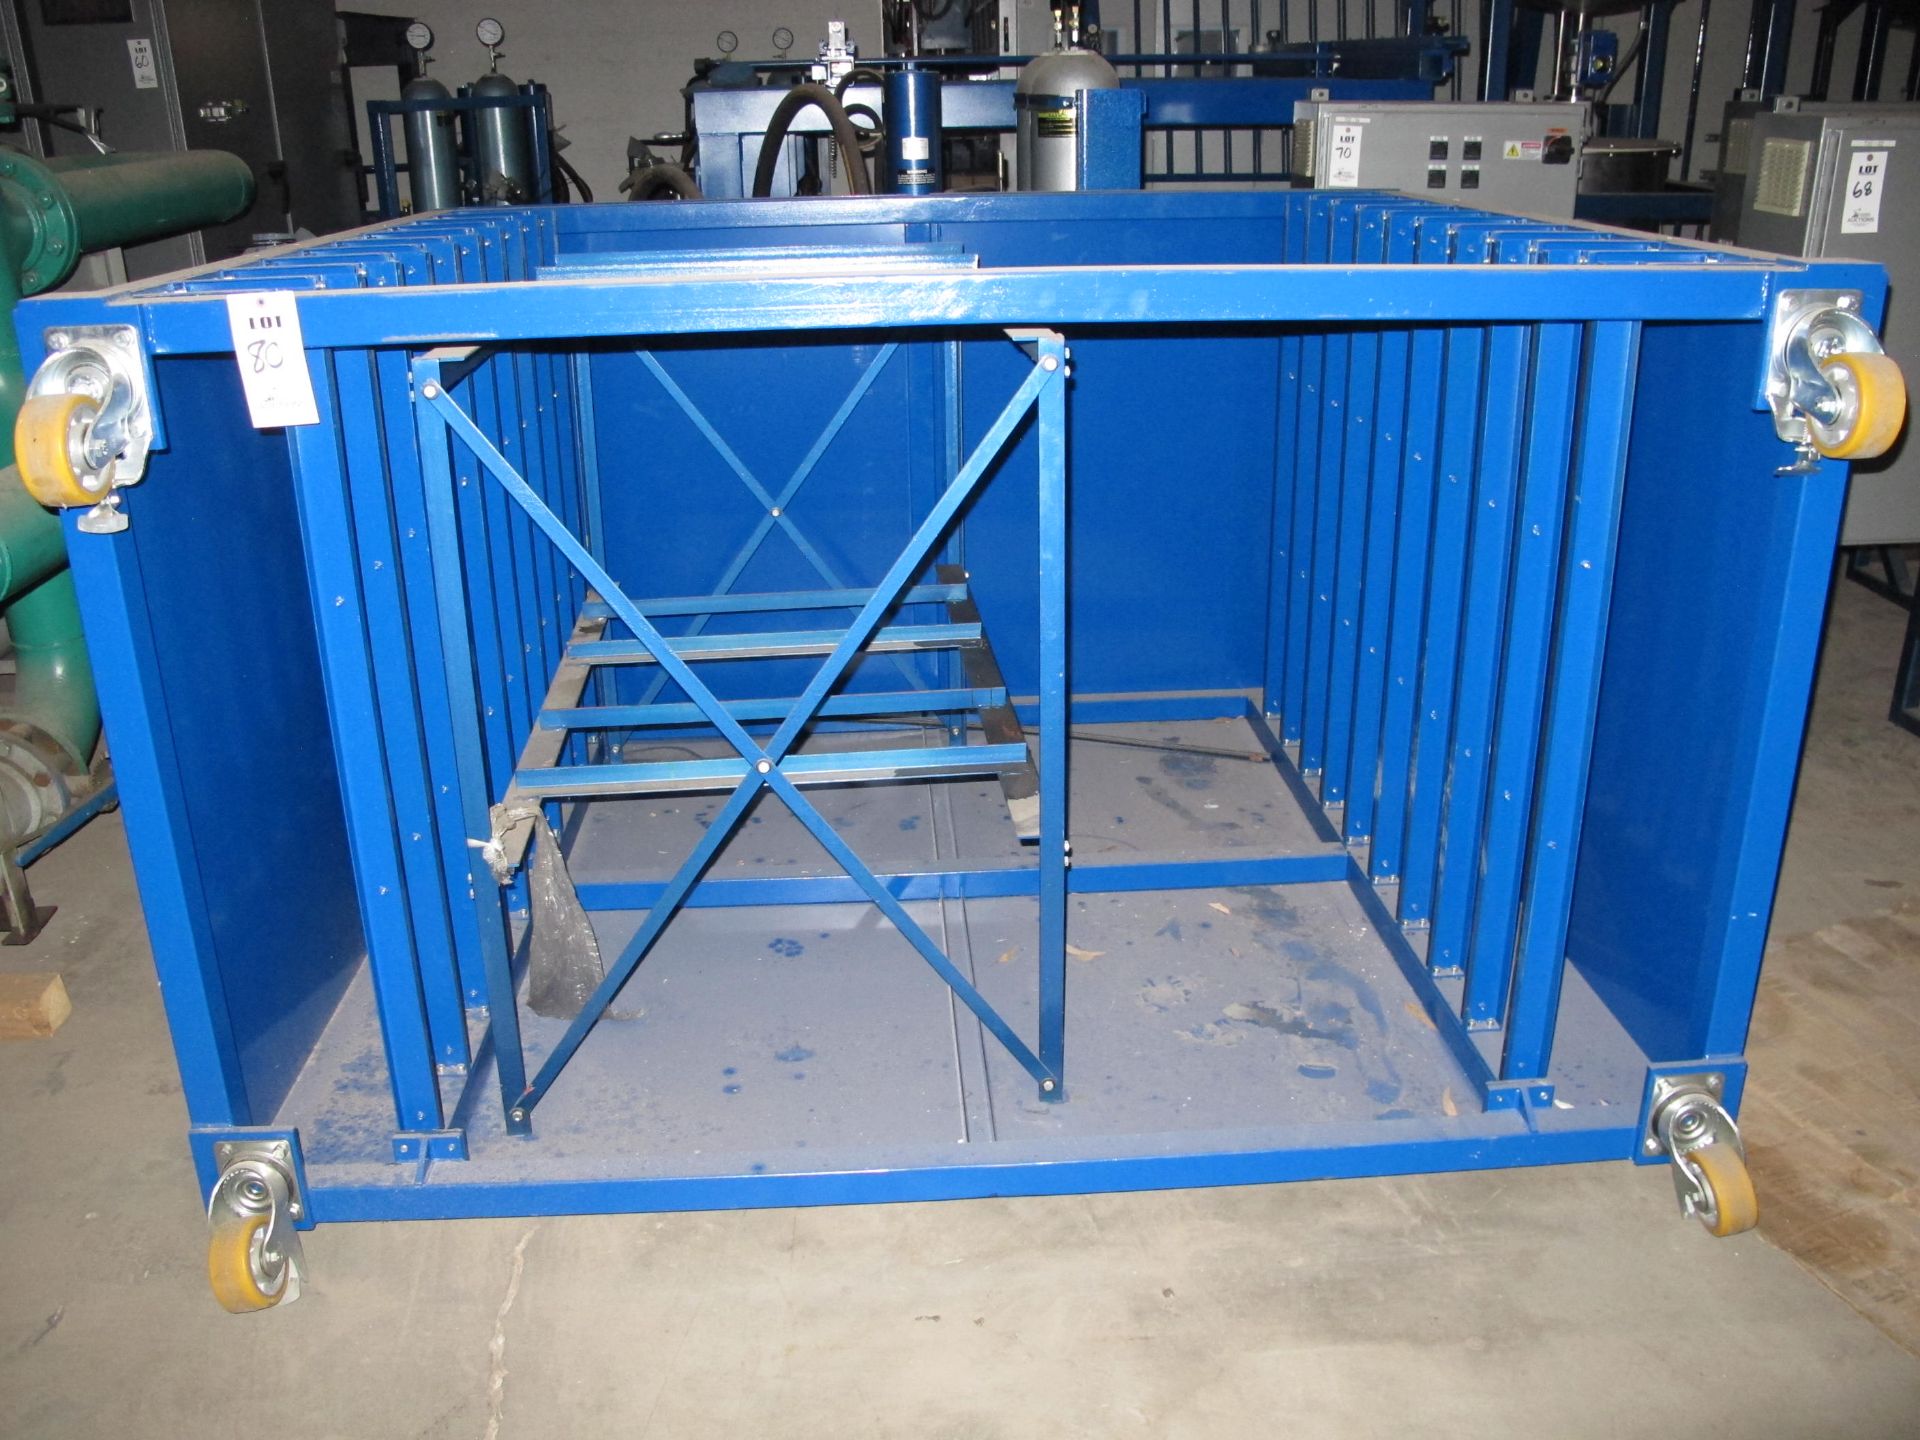 MISC. STEEL STRUCTURES AND ELECTRICAL, LOADING & HANDLING FEE: $600